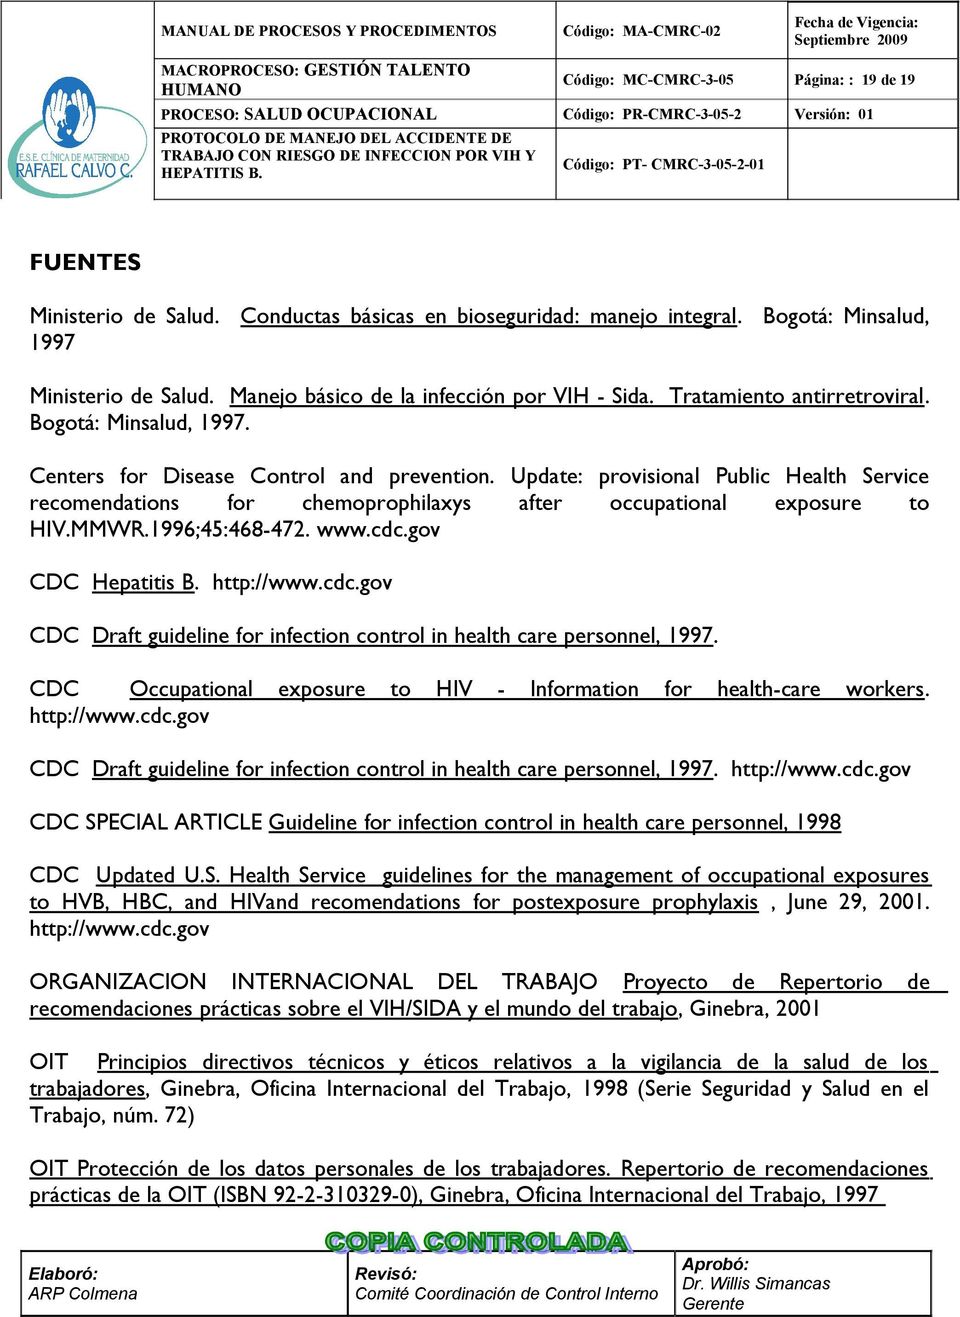 Update: provisional Public Health Service recomendations for chemoprophilaxys after occupational exposure to HIV.MMWR.1996;45:468-472. www.cdc.